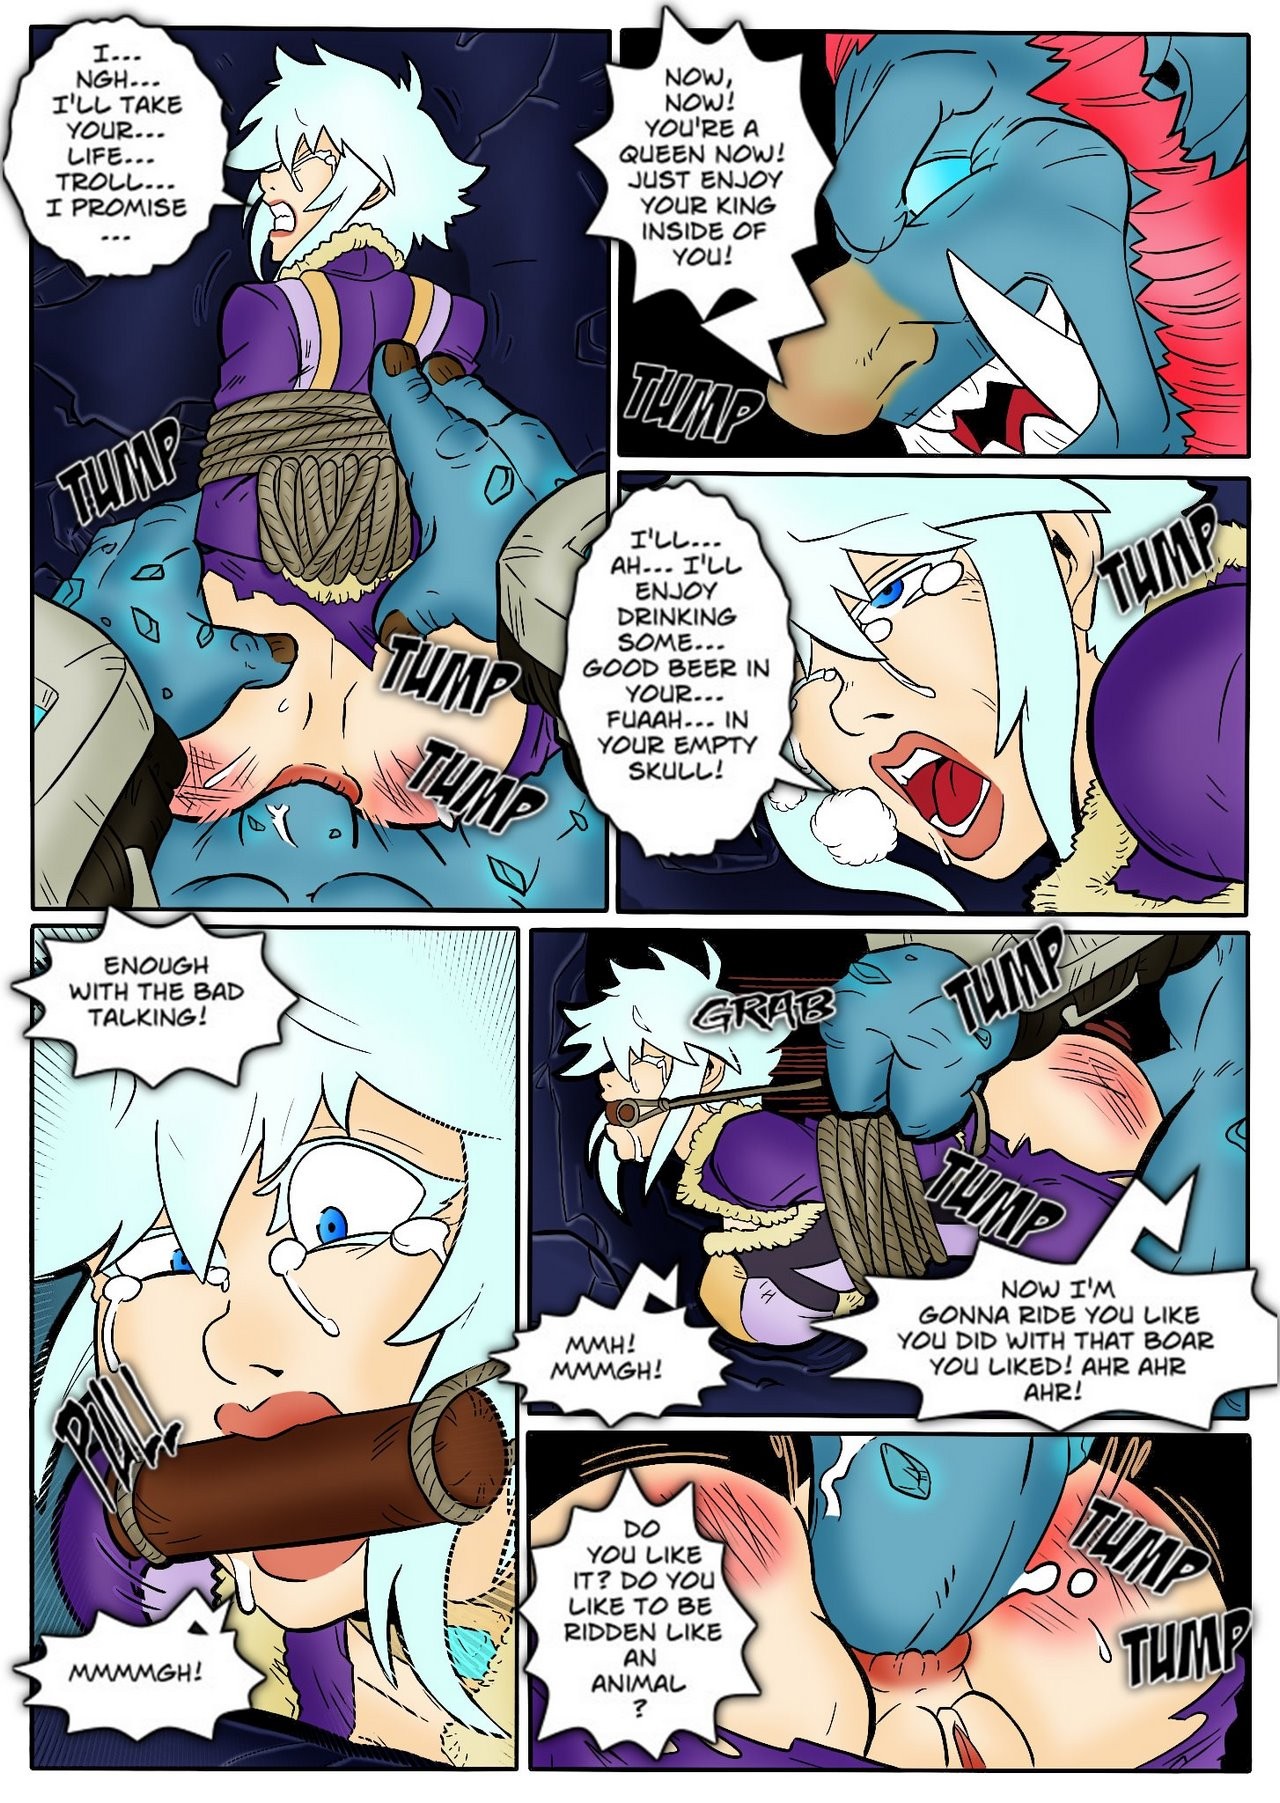 Tales of the Troll King ch. 1 - 3 ] [Colorized] porn comic picture 29